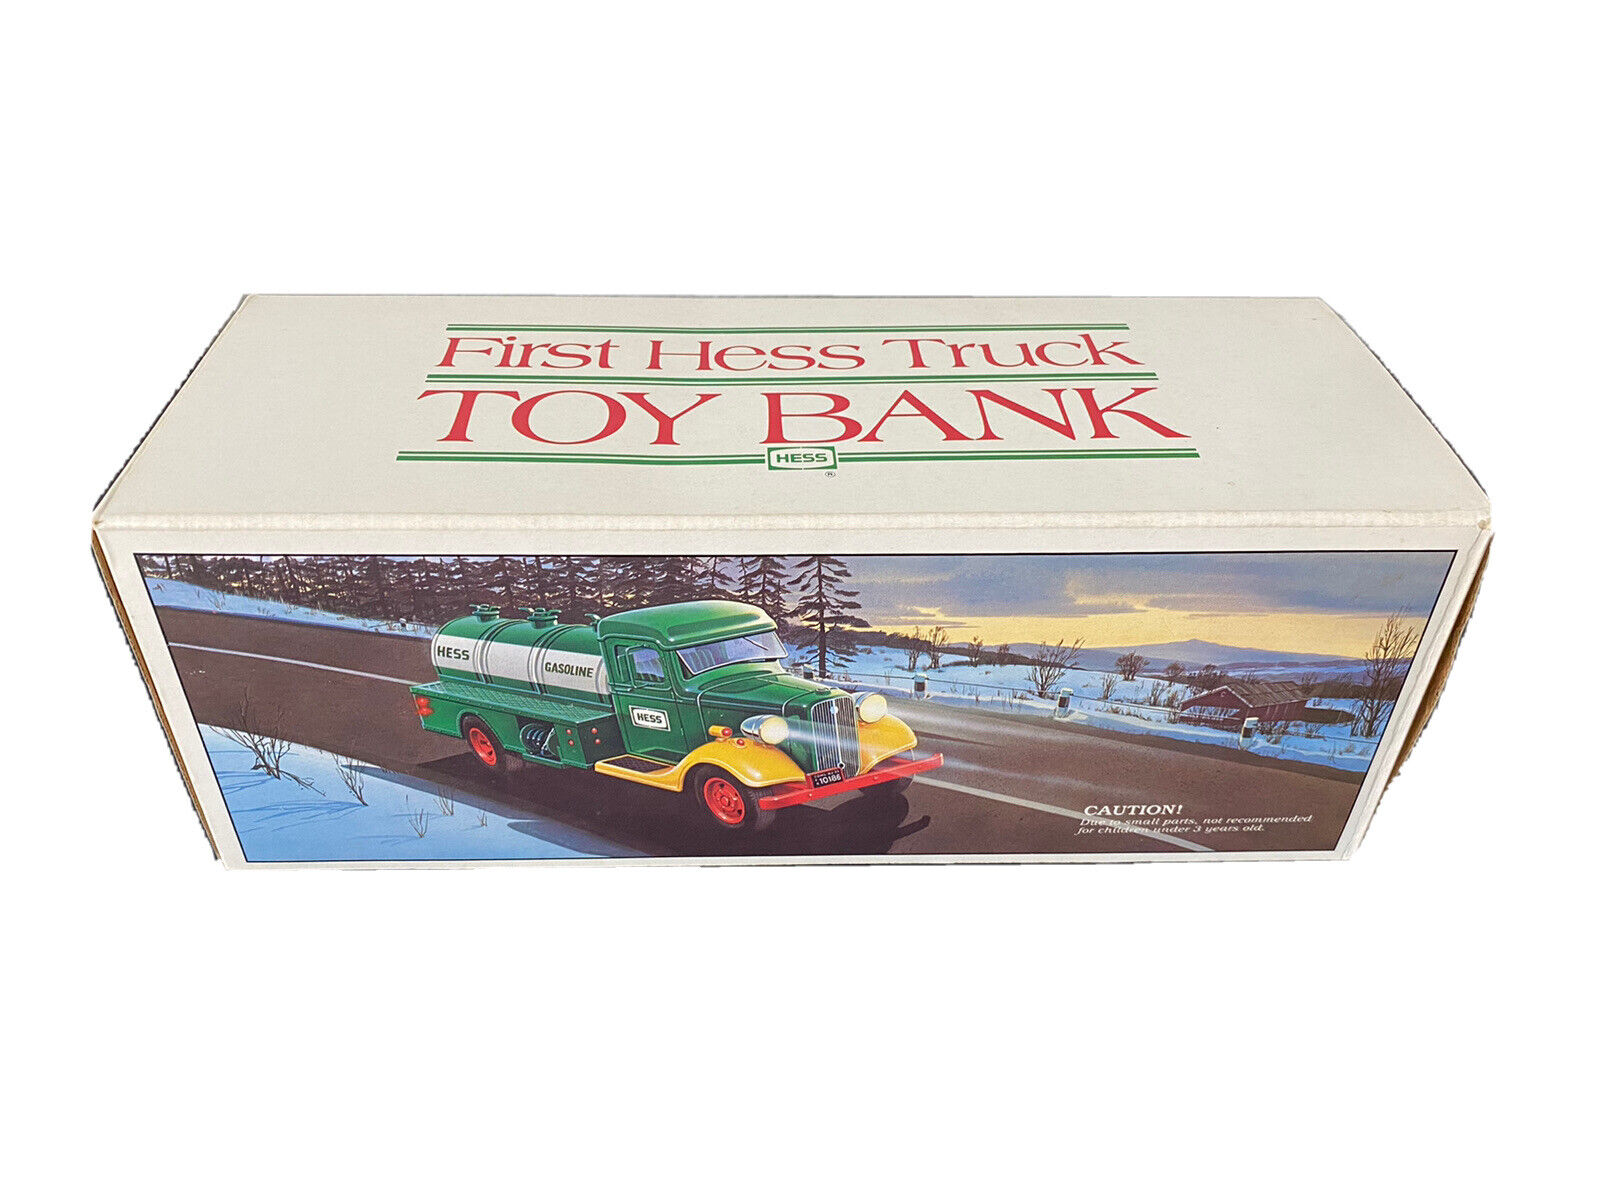 Vintage 1985 First Hess Truck Toy Bank - NIB, Mint Condition, Collectors Item